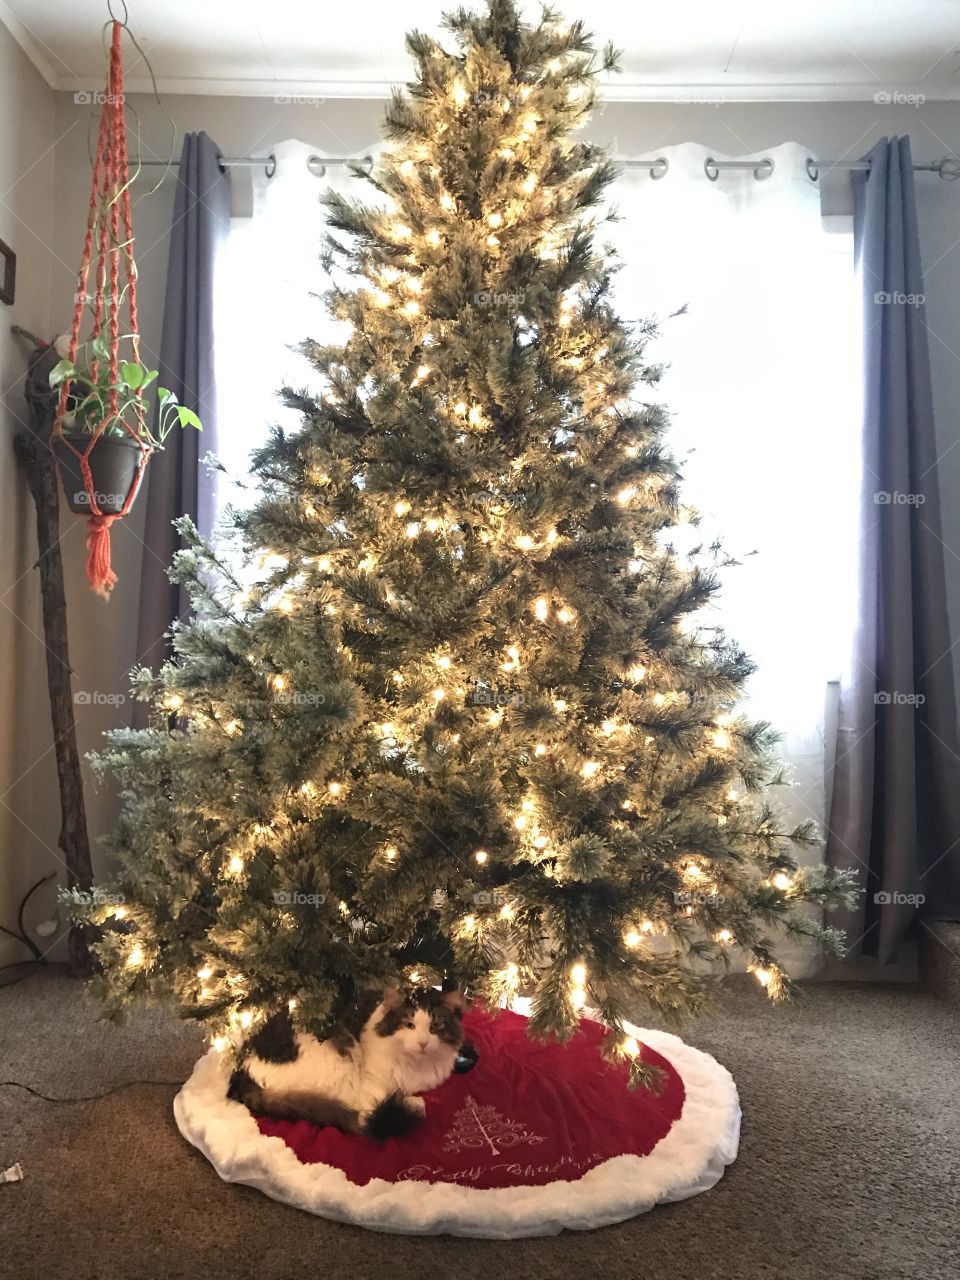 Kitty wrapped all cozy under the Christmas tree ready to be decorated. 